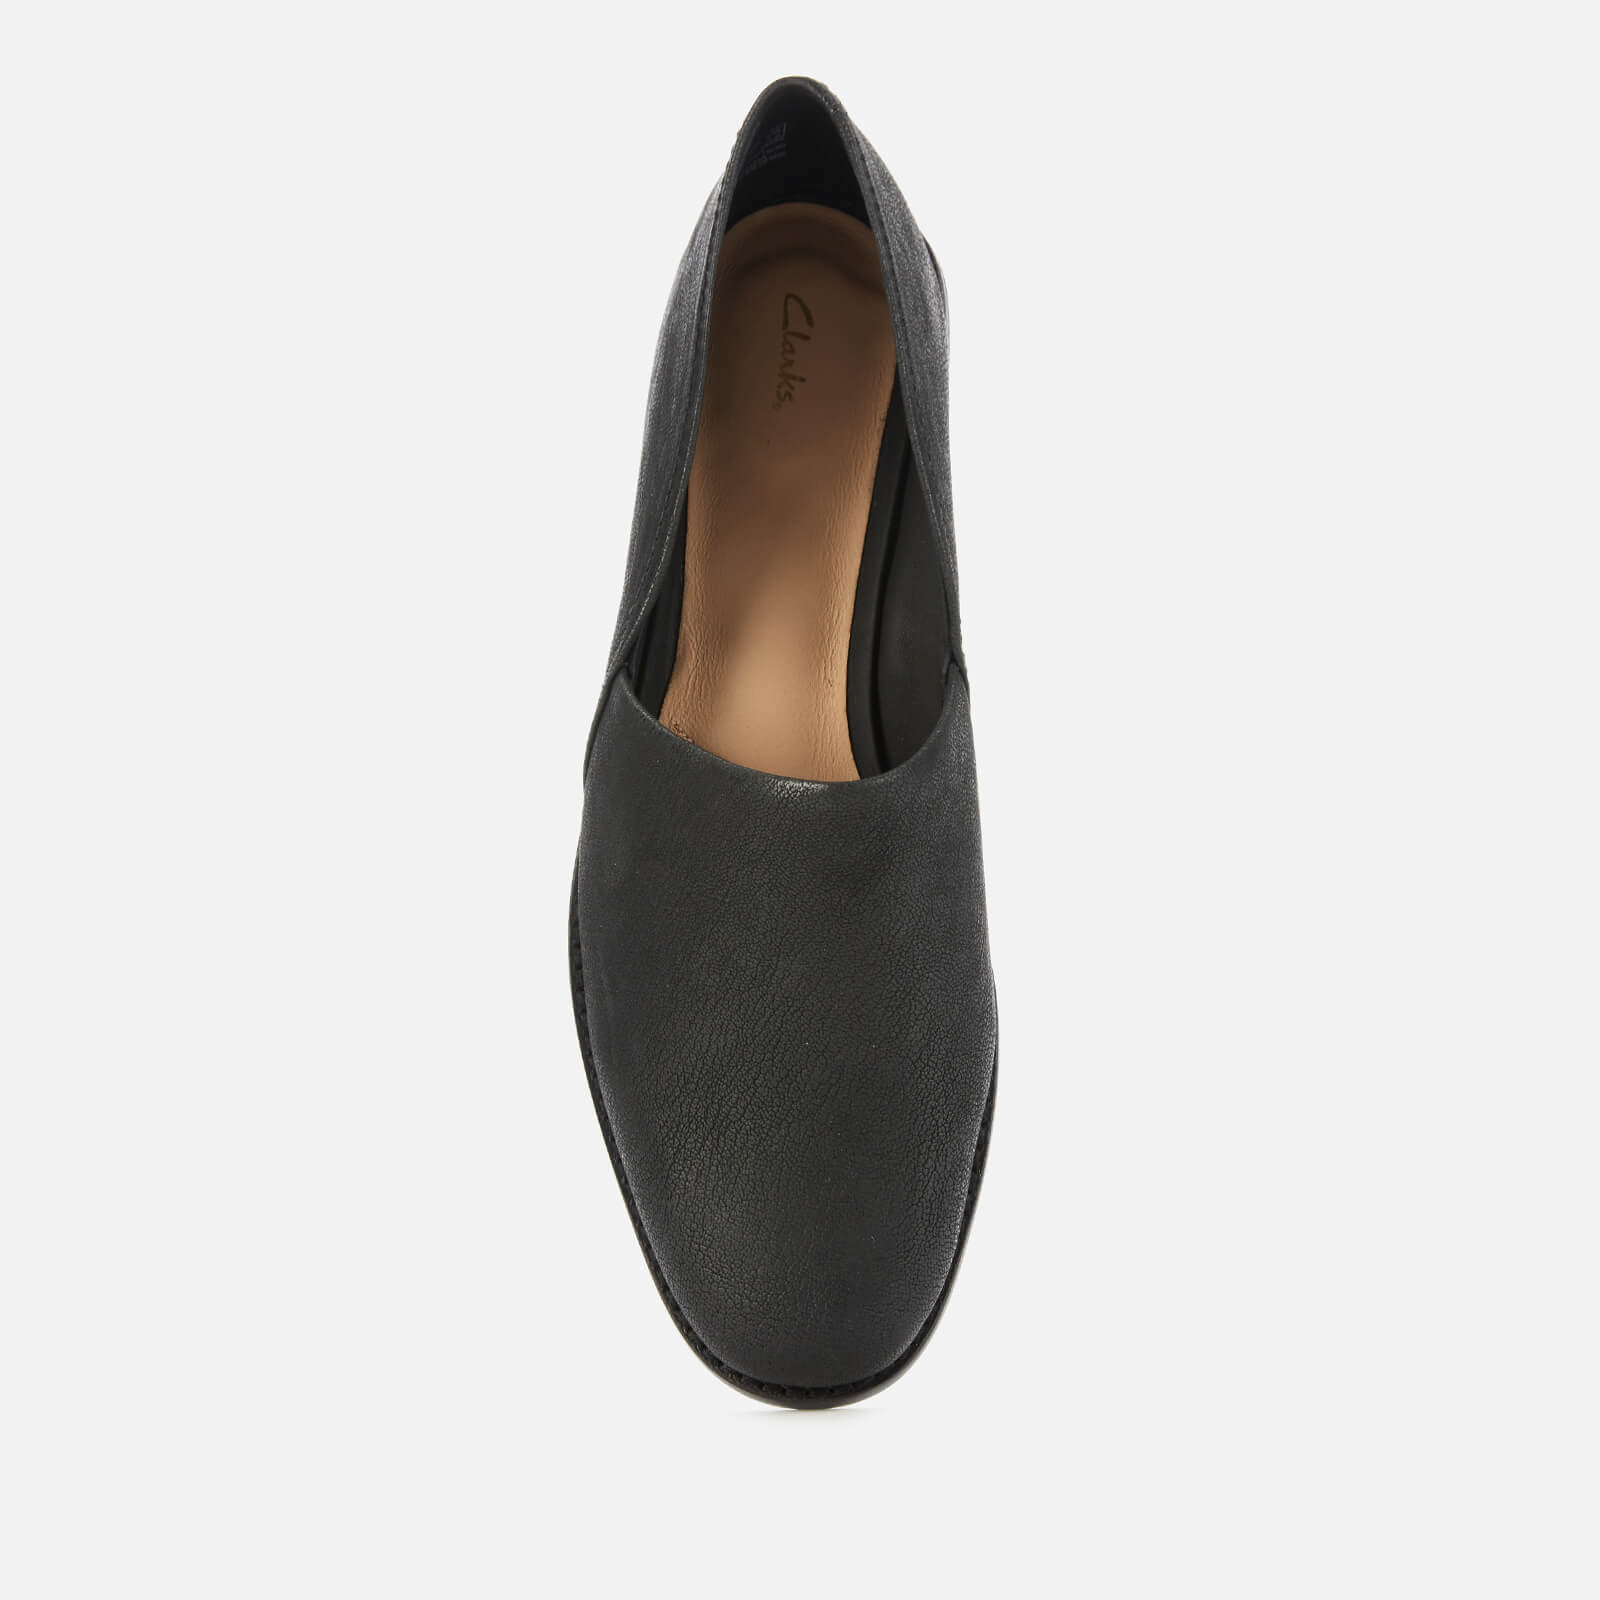 clarks women's pure easy leather flats - black - uk 3